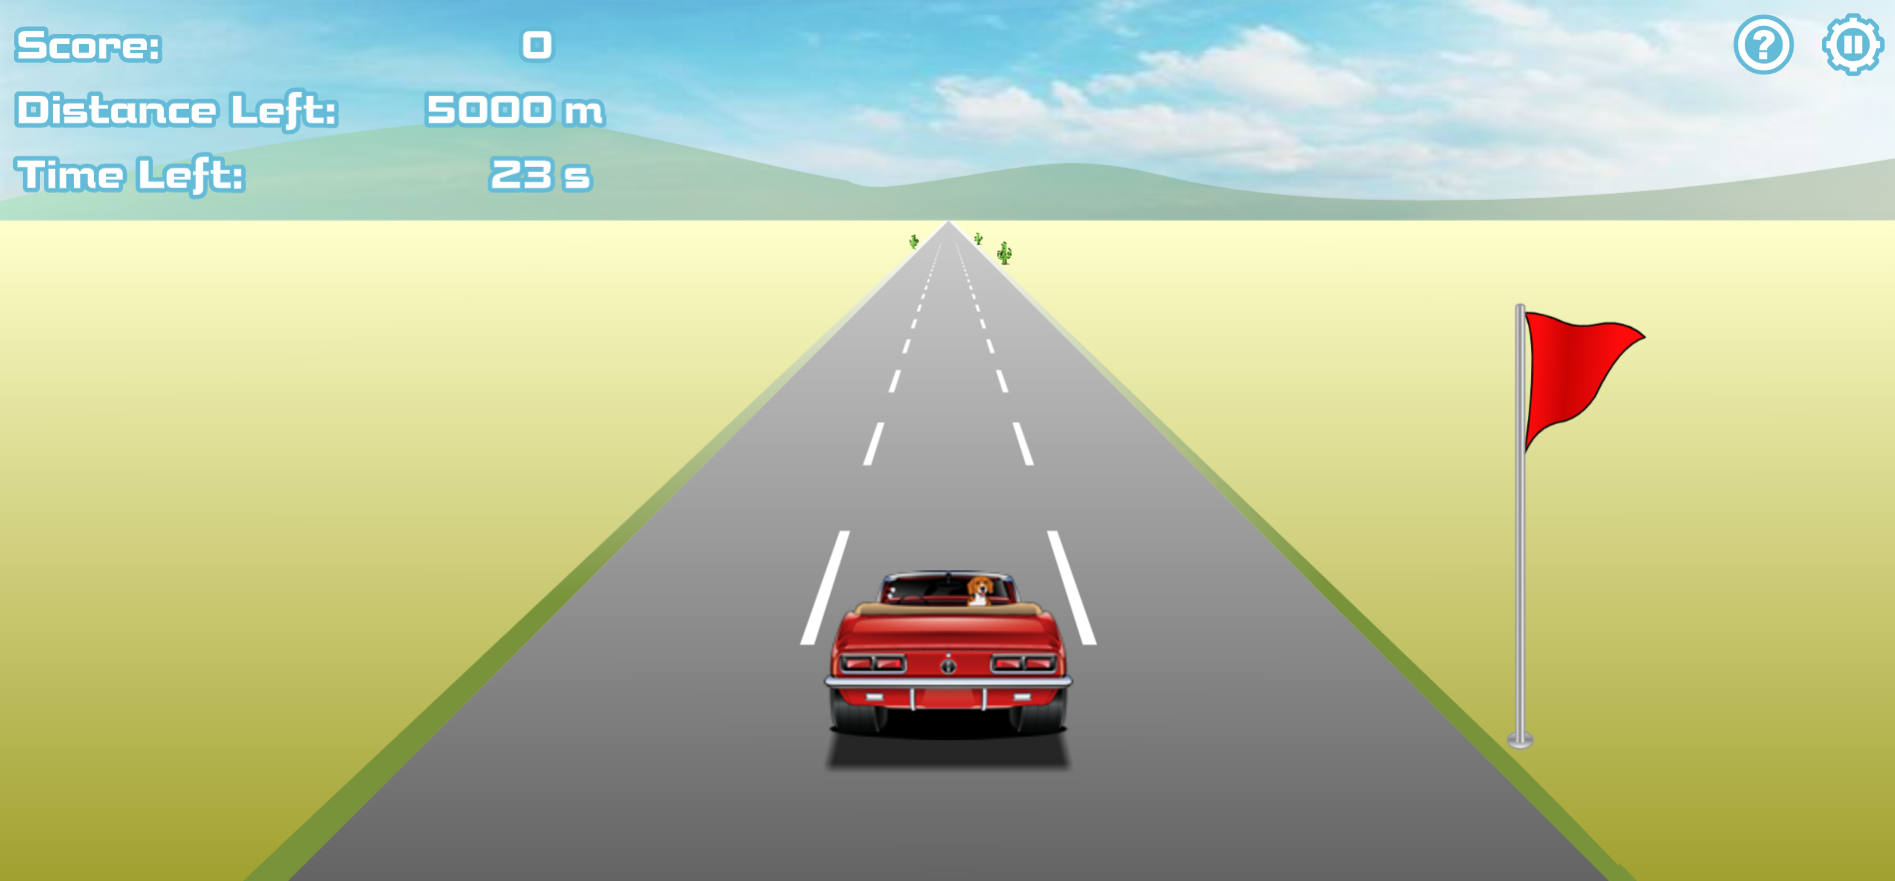 Tooned Racer Game